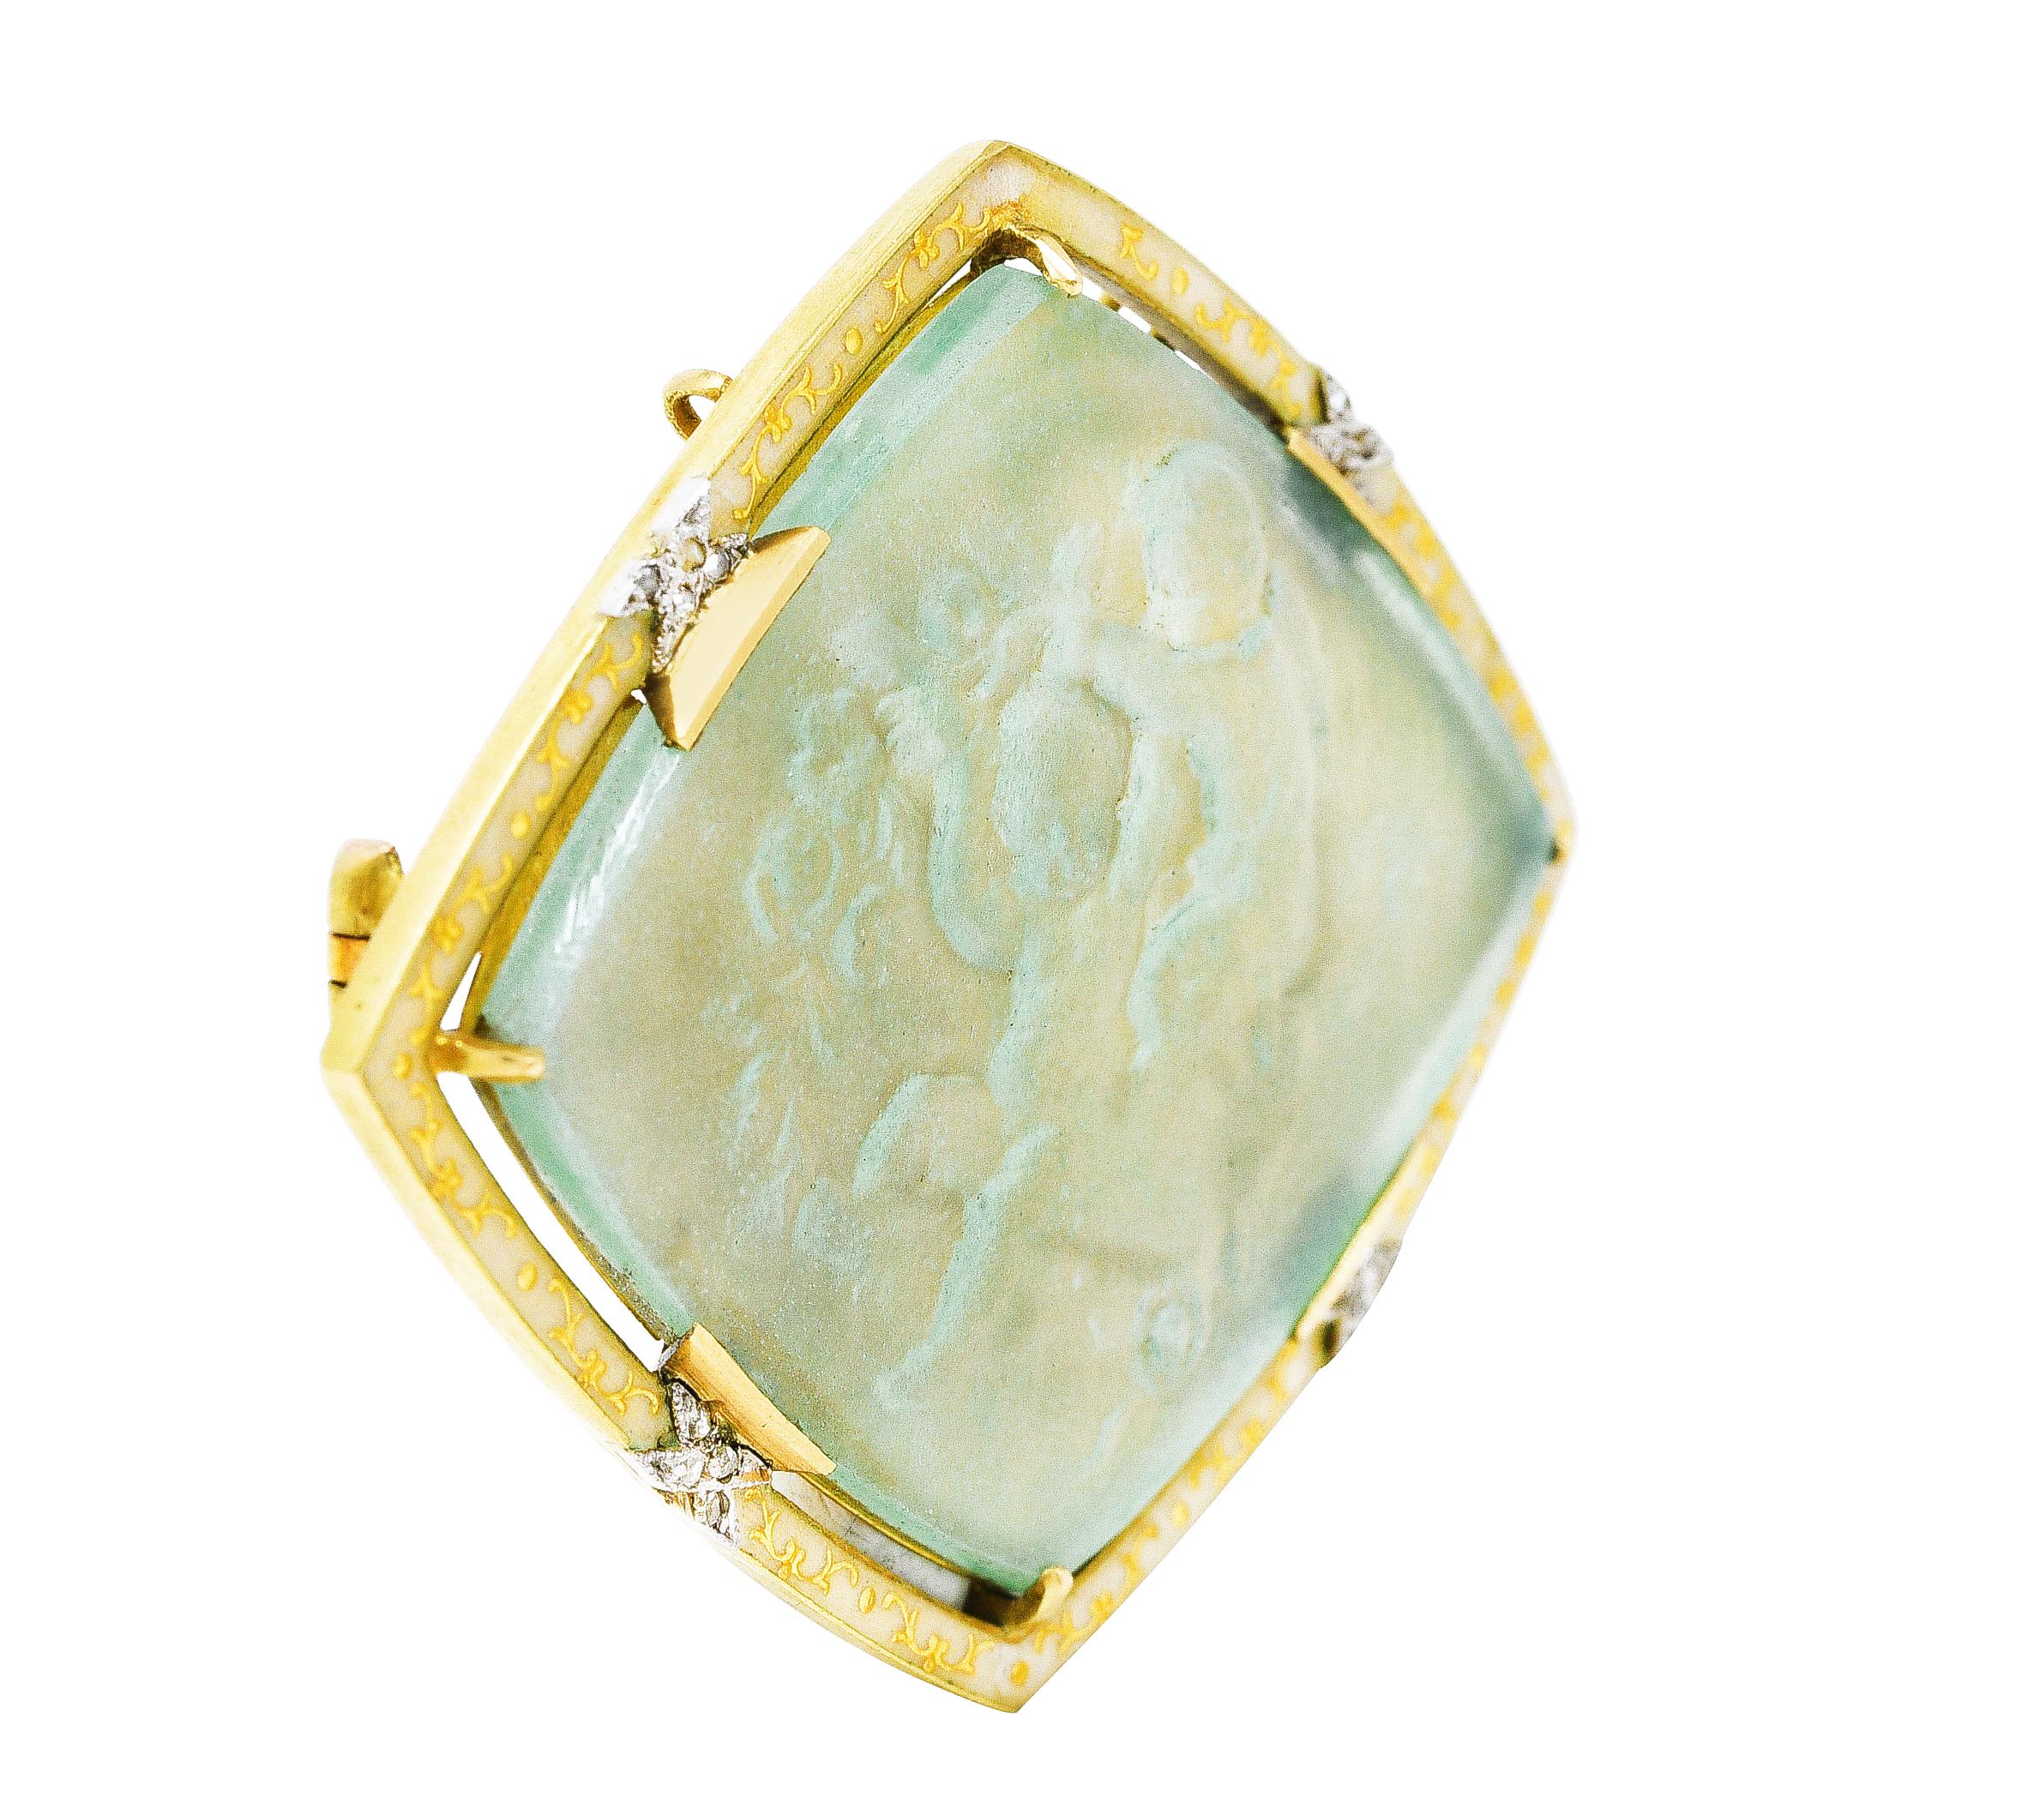 Brooch centers a rhombus shaped glass cameo depicting two winged cherubs playing with a garland of flowers. Transparent blueish green in color - set by wide prongs with a gold scroll motif and enamel surround. Guilloche and transparent light yellow